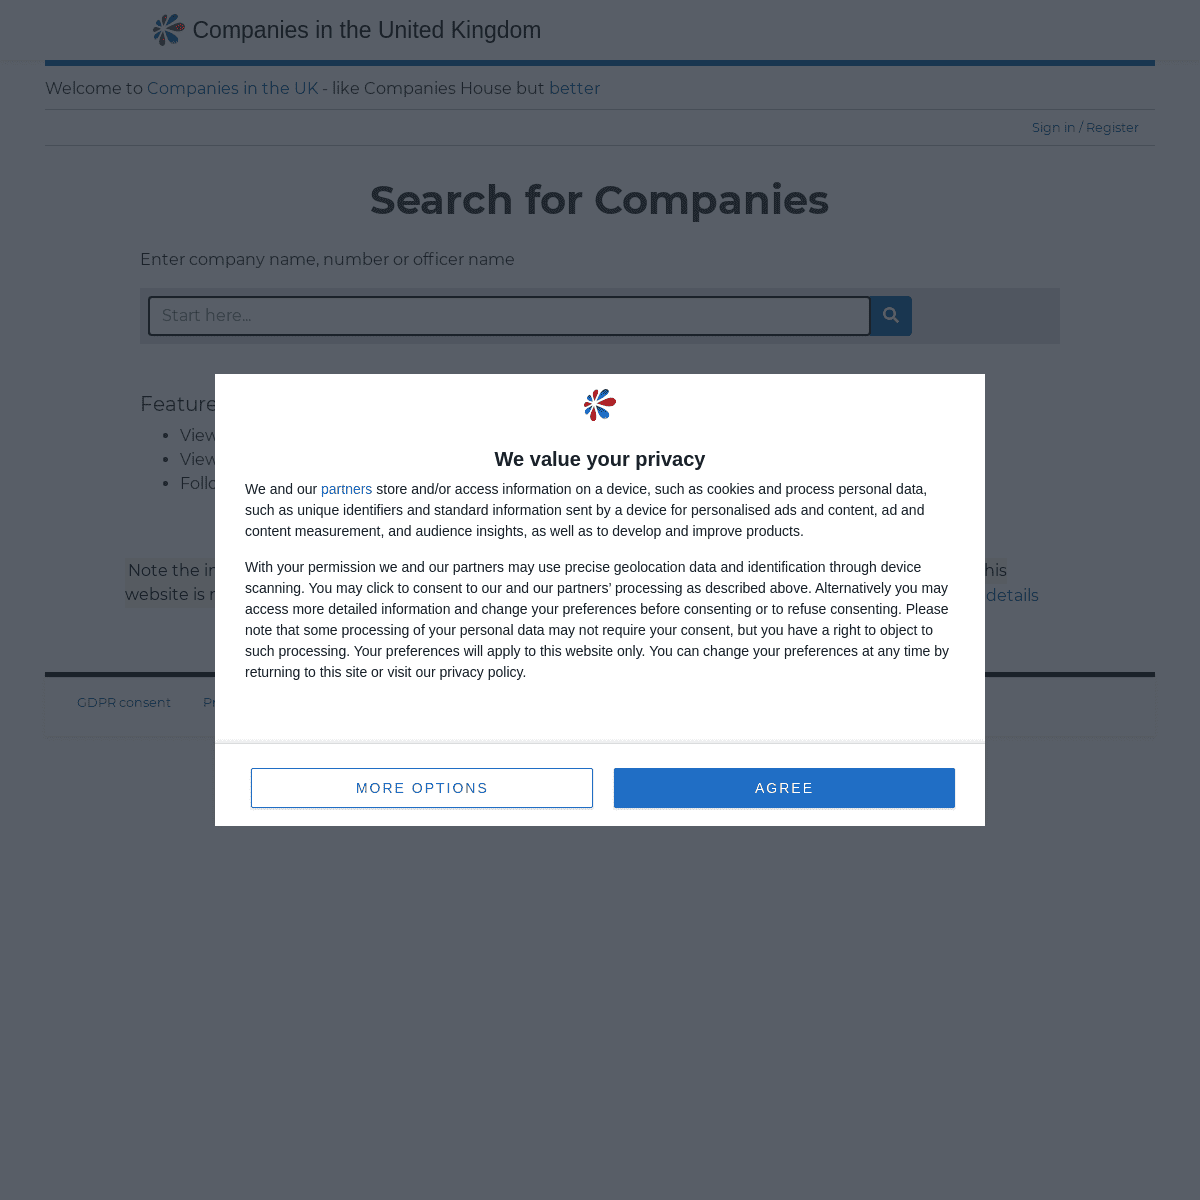 A complete backup of https://companiesintheuk.co.uk